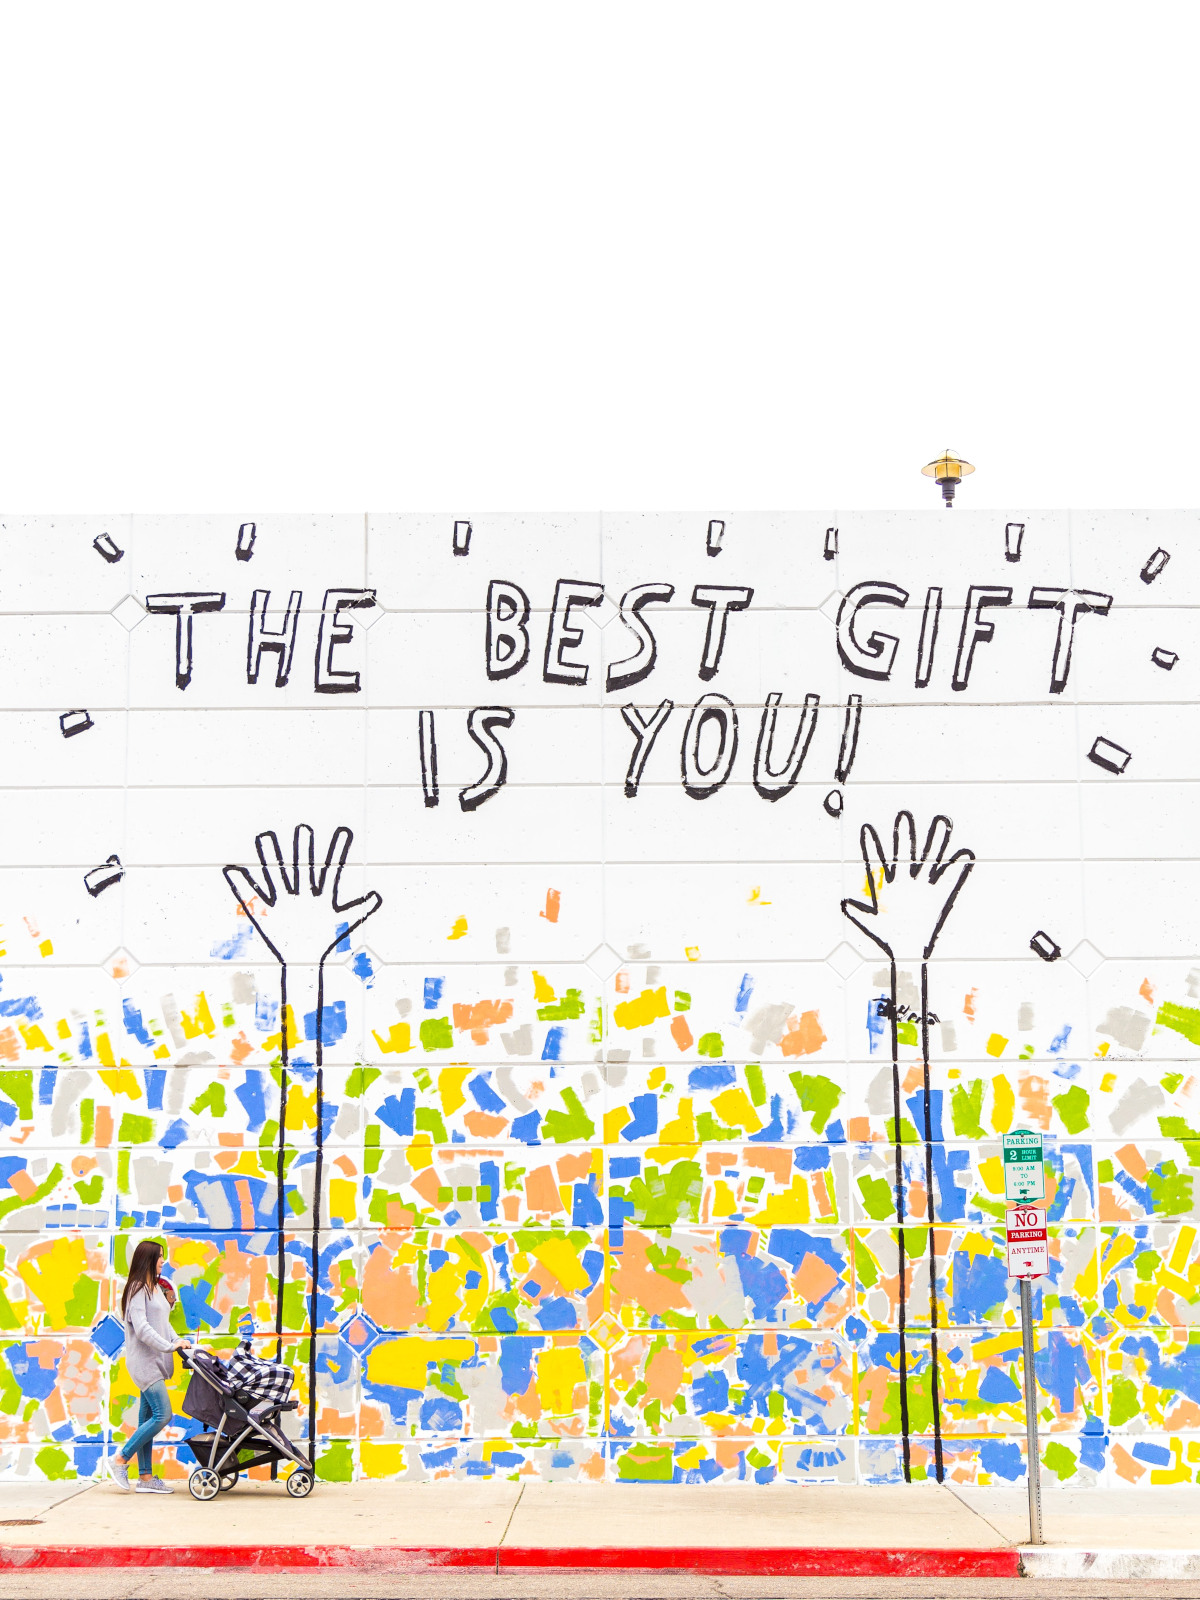 "The Best Gift Is You!" street art